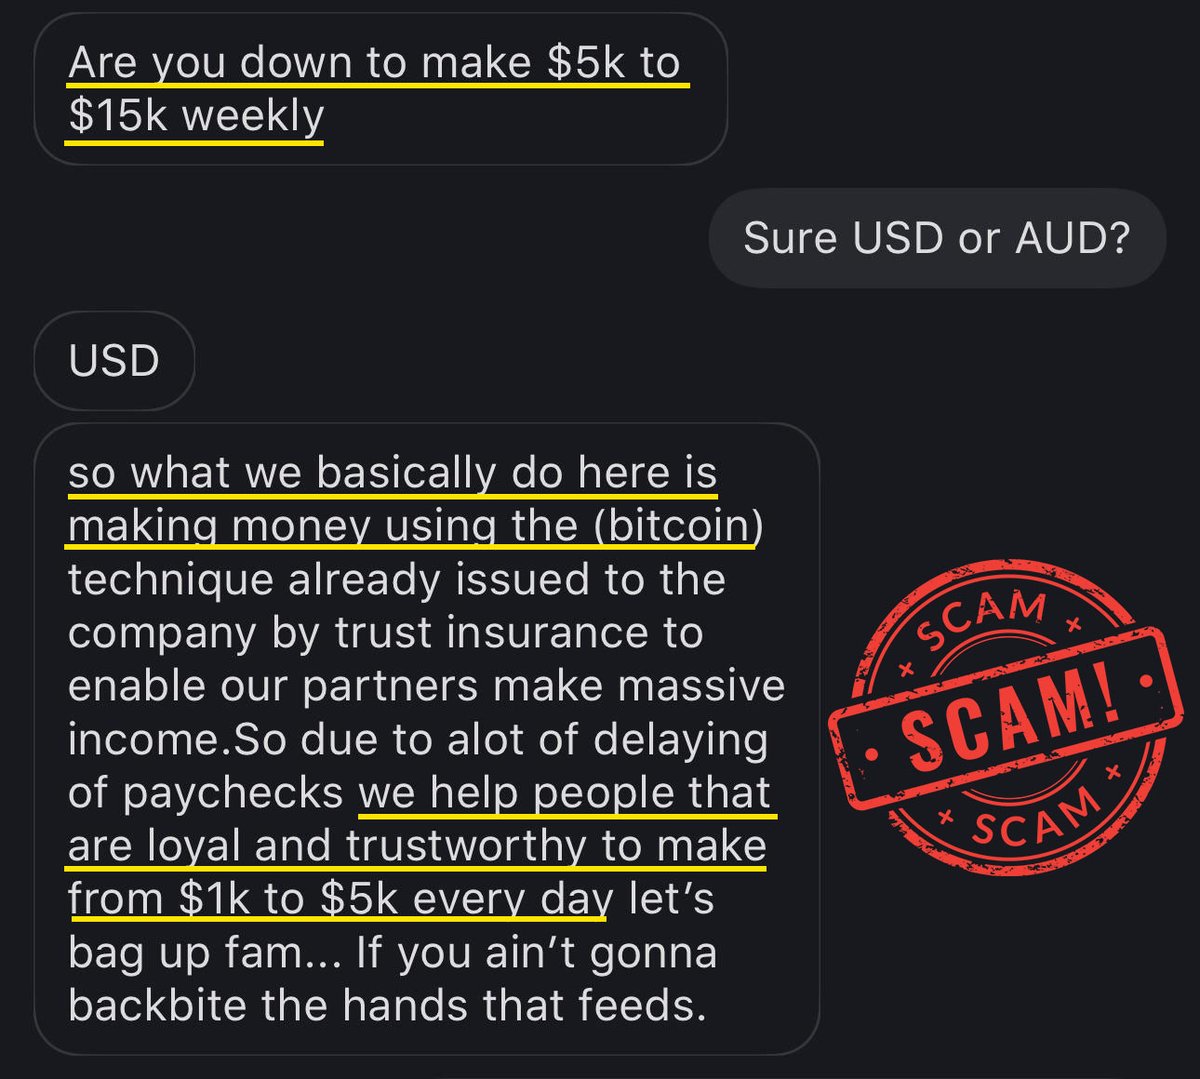 Get rich quick schemes are almost guaranteed to be scams. Don’t let greed get the better of you, as you are more likely to lose money than make some quick cash. #scam #fraud #moneyflipping #bitcoin